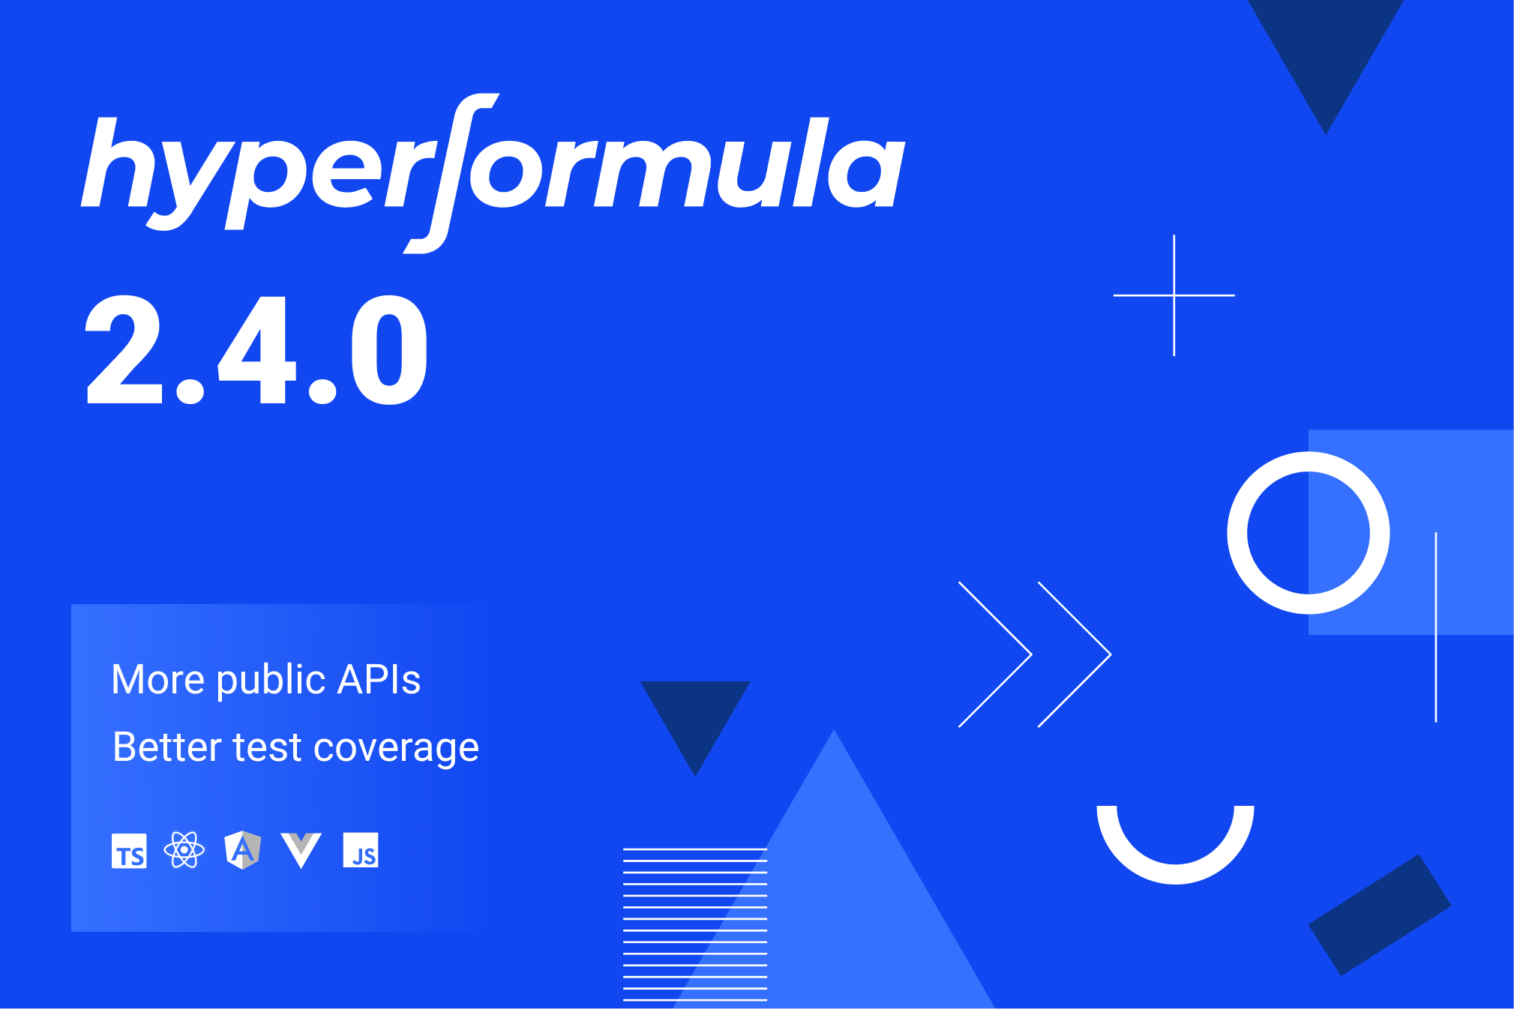 HyperFormula 2.4.0: More public APIs and better test coverage